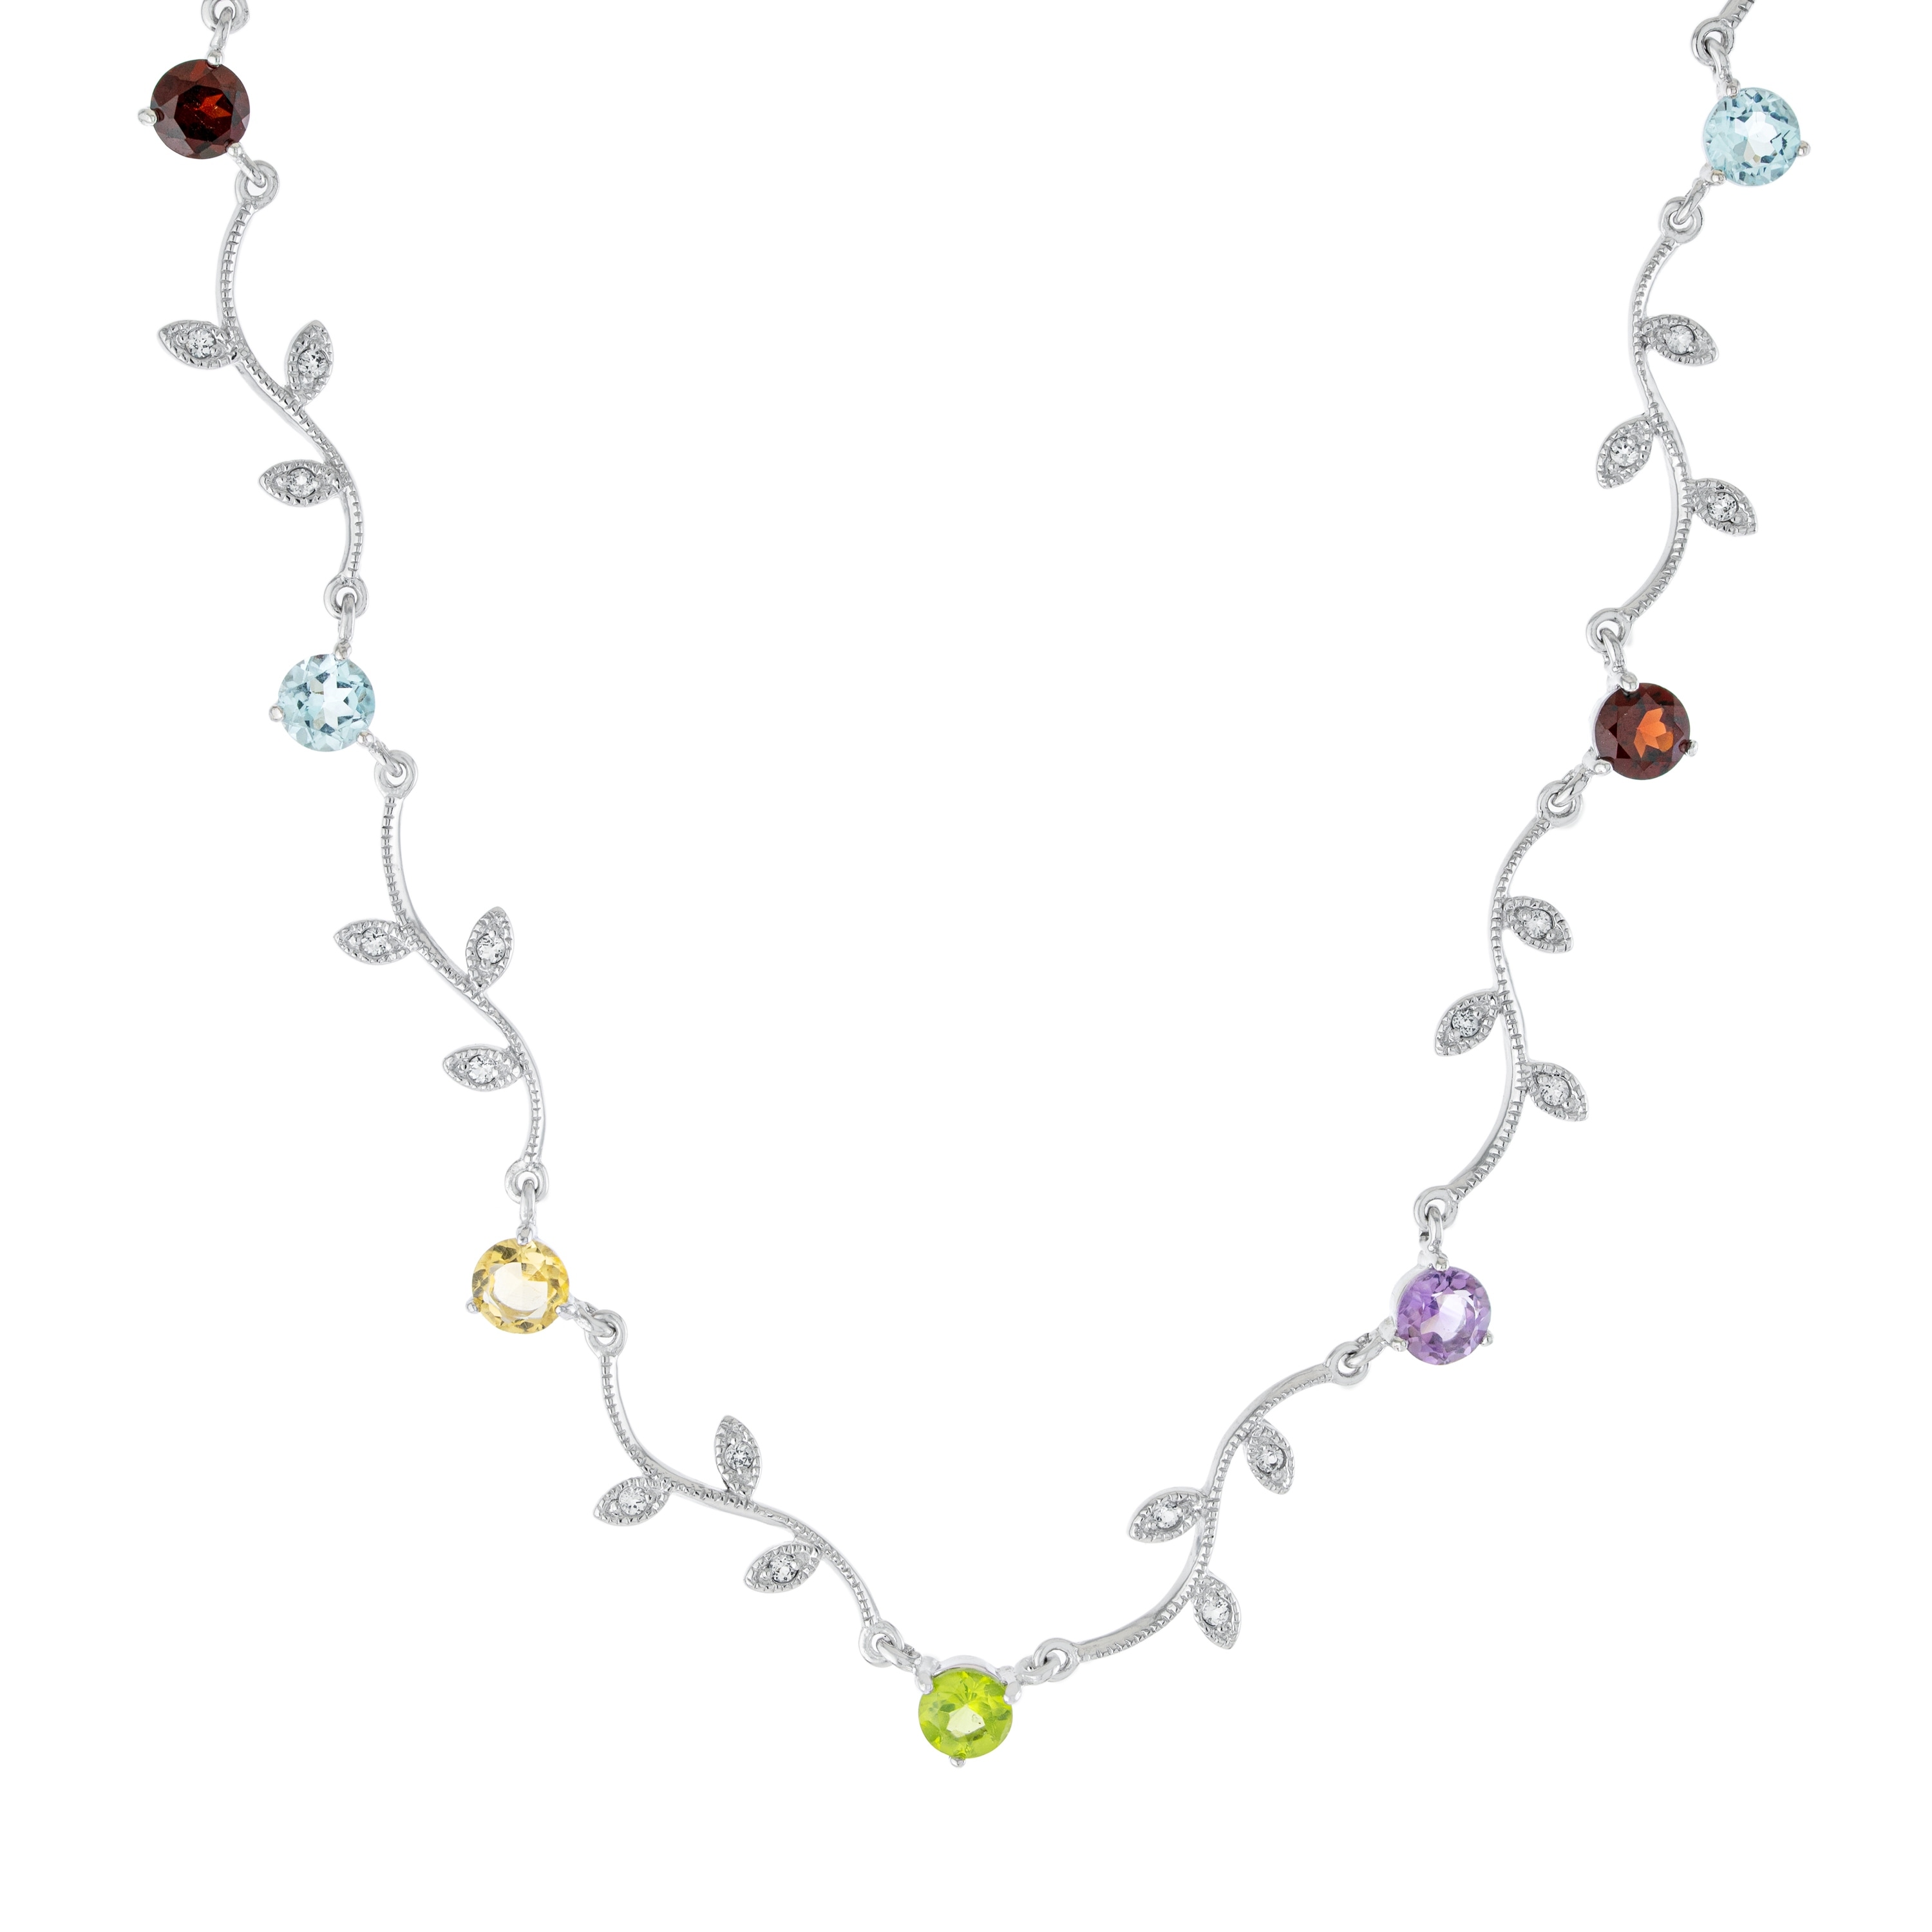 16 925 Sterling Silver Round Small Stations with Multi-Tonal Bezel Gemstones Chain Necklace 